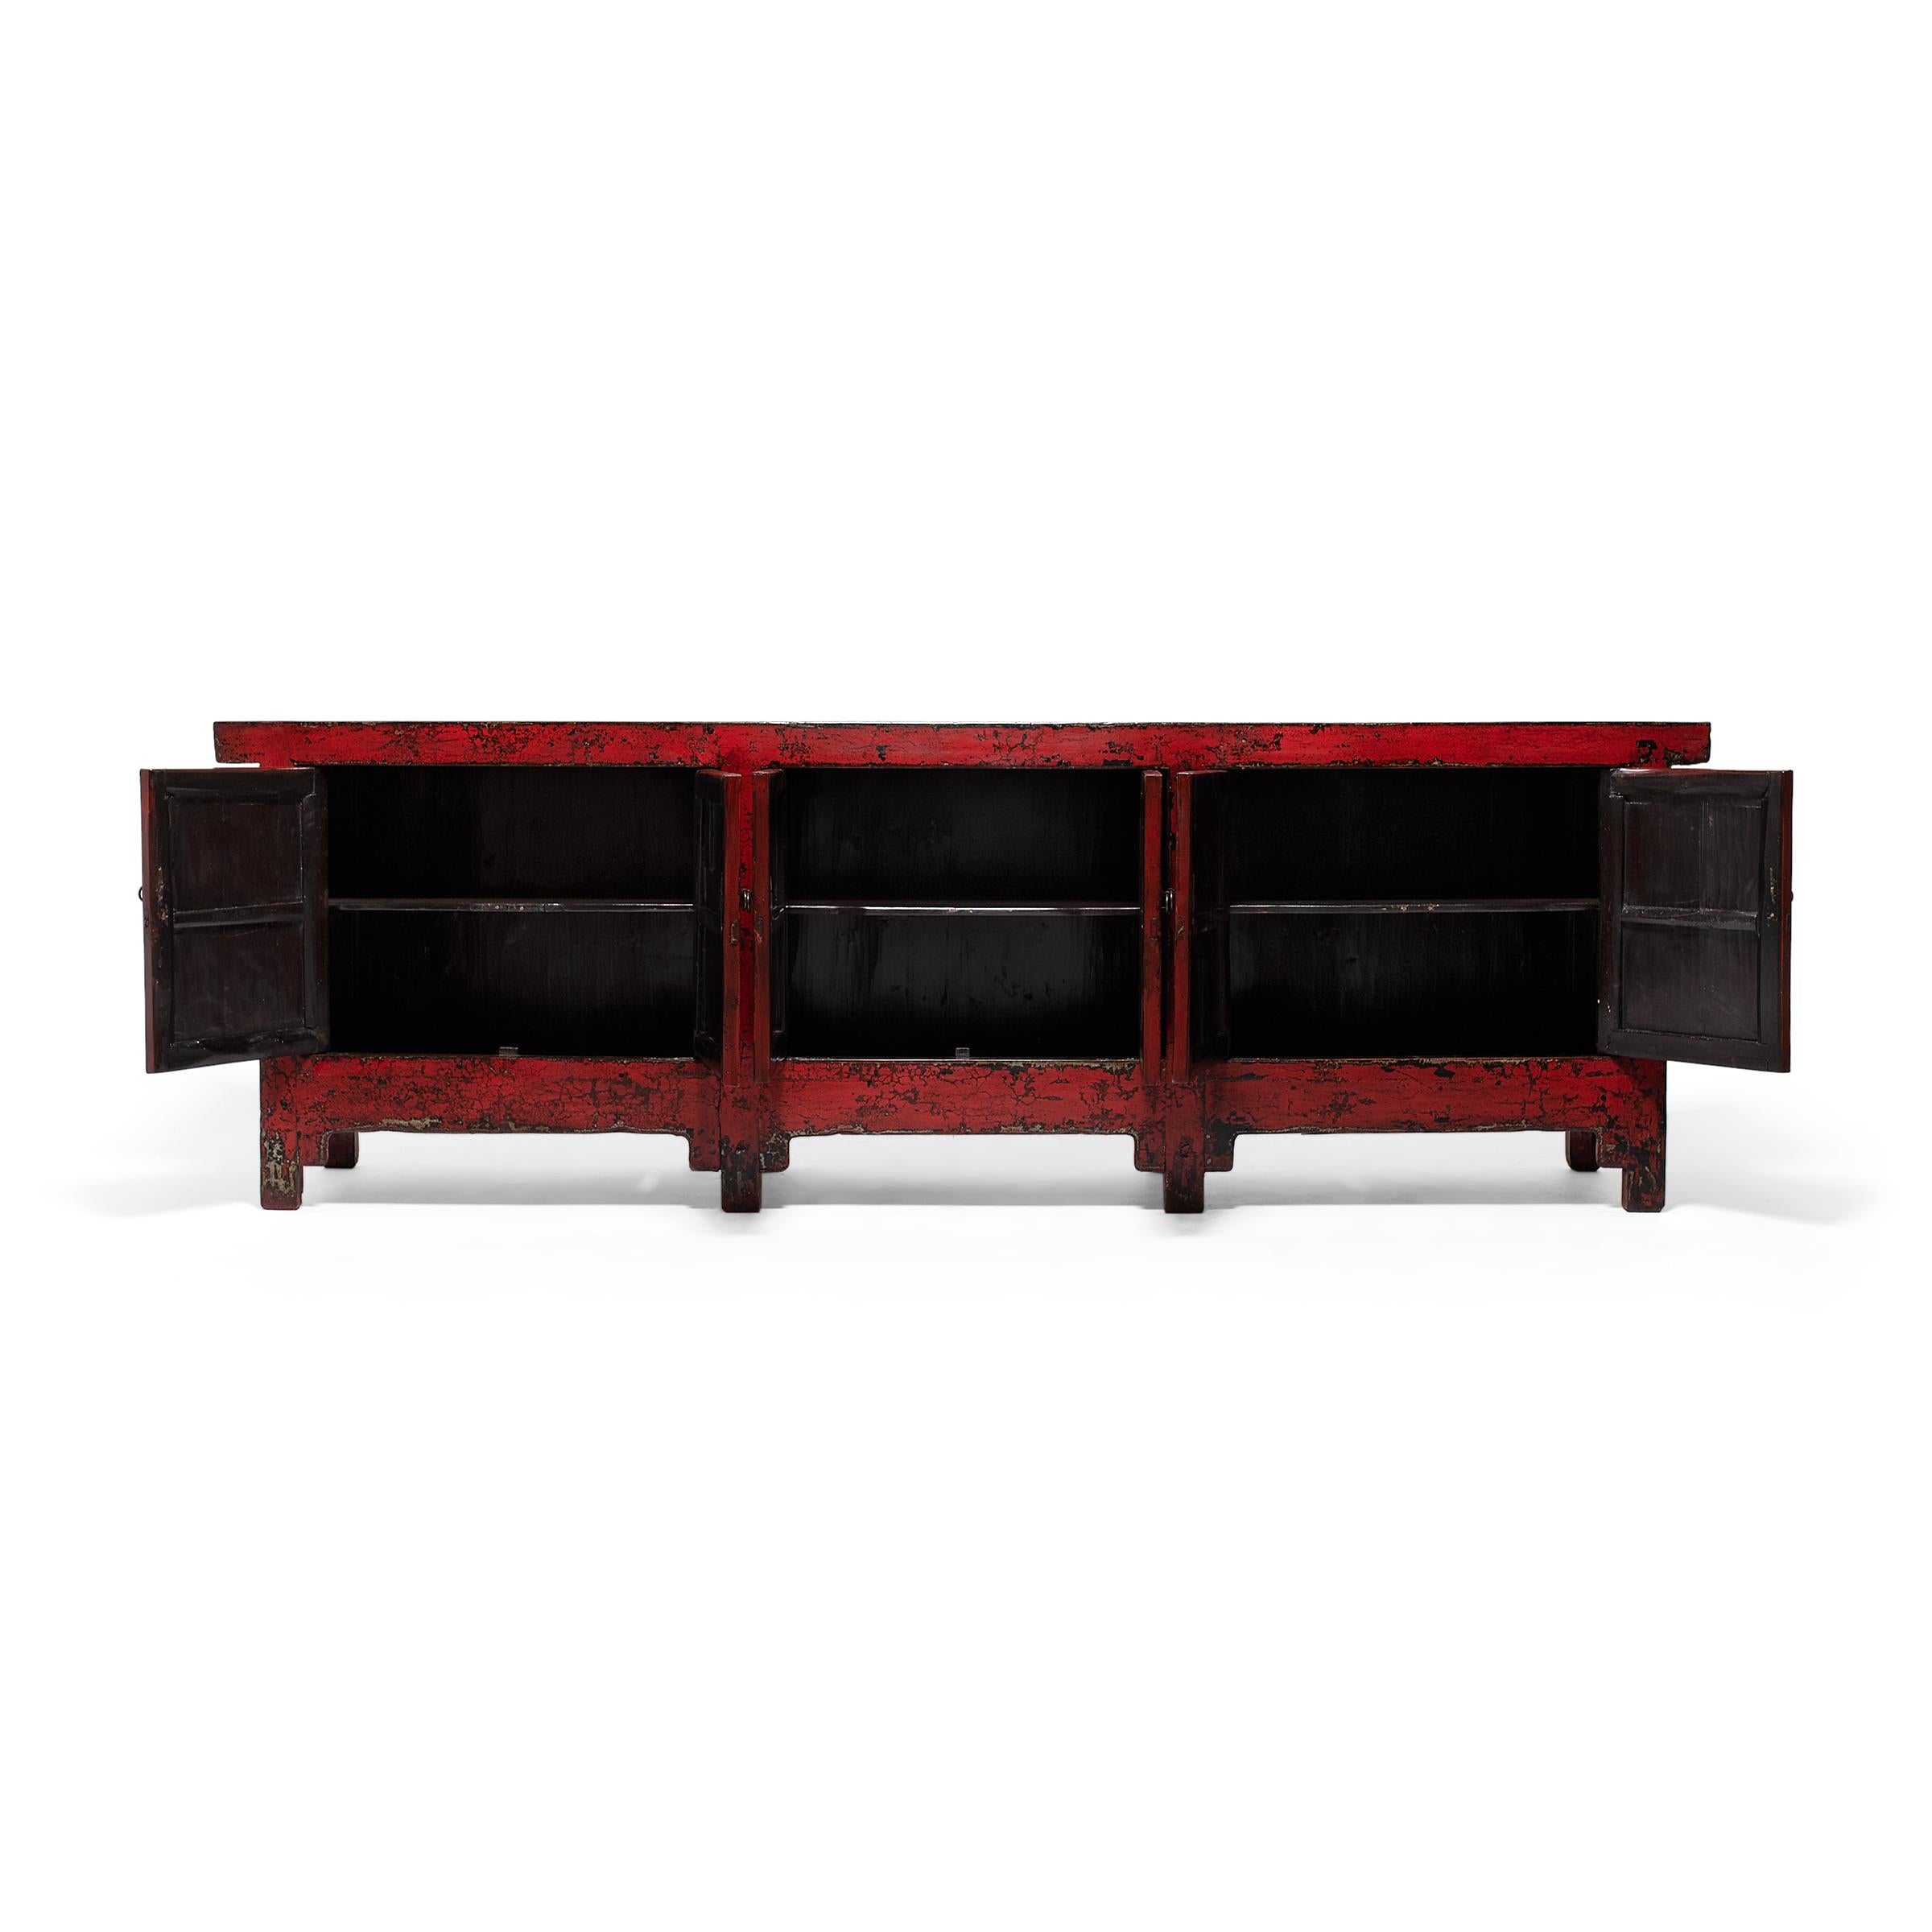 Created in the style of Mongolian storage coffers, this monumental sideboard combines the clean lines of modern furniture design with the weathered textures of rustic lacquerware. Originally configured to open from the top, the cabinet was modified